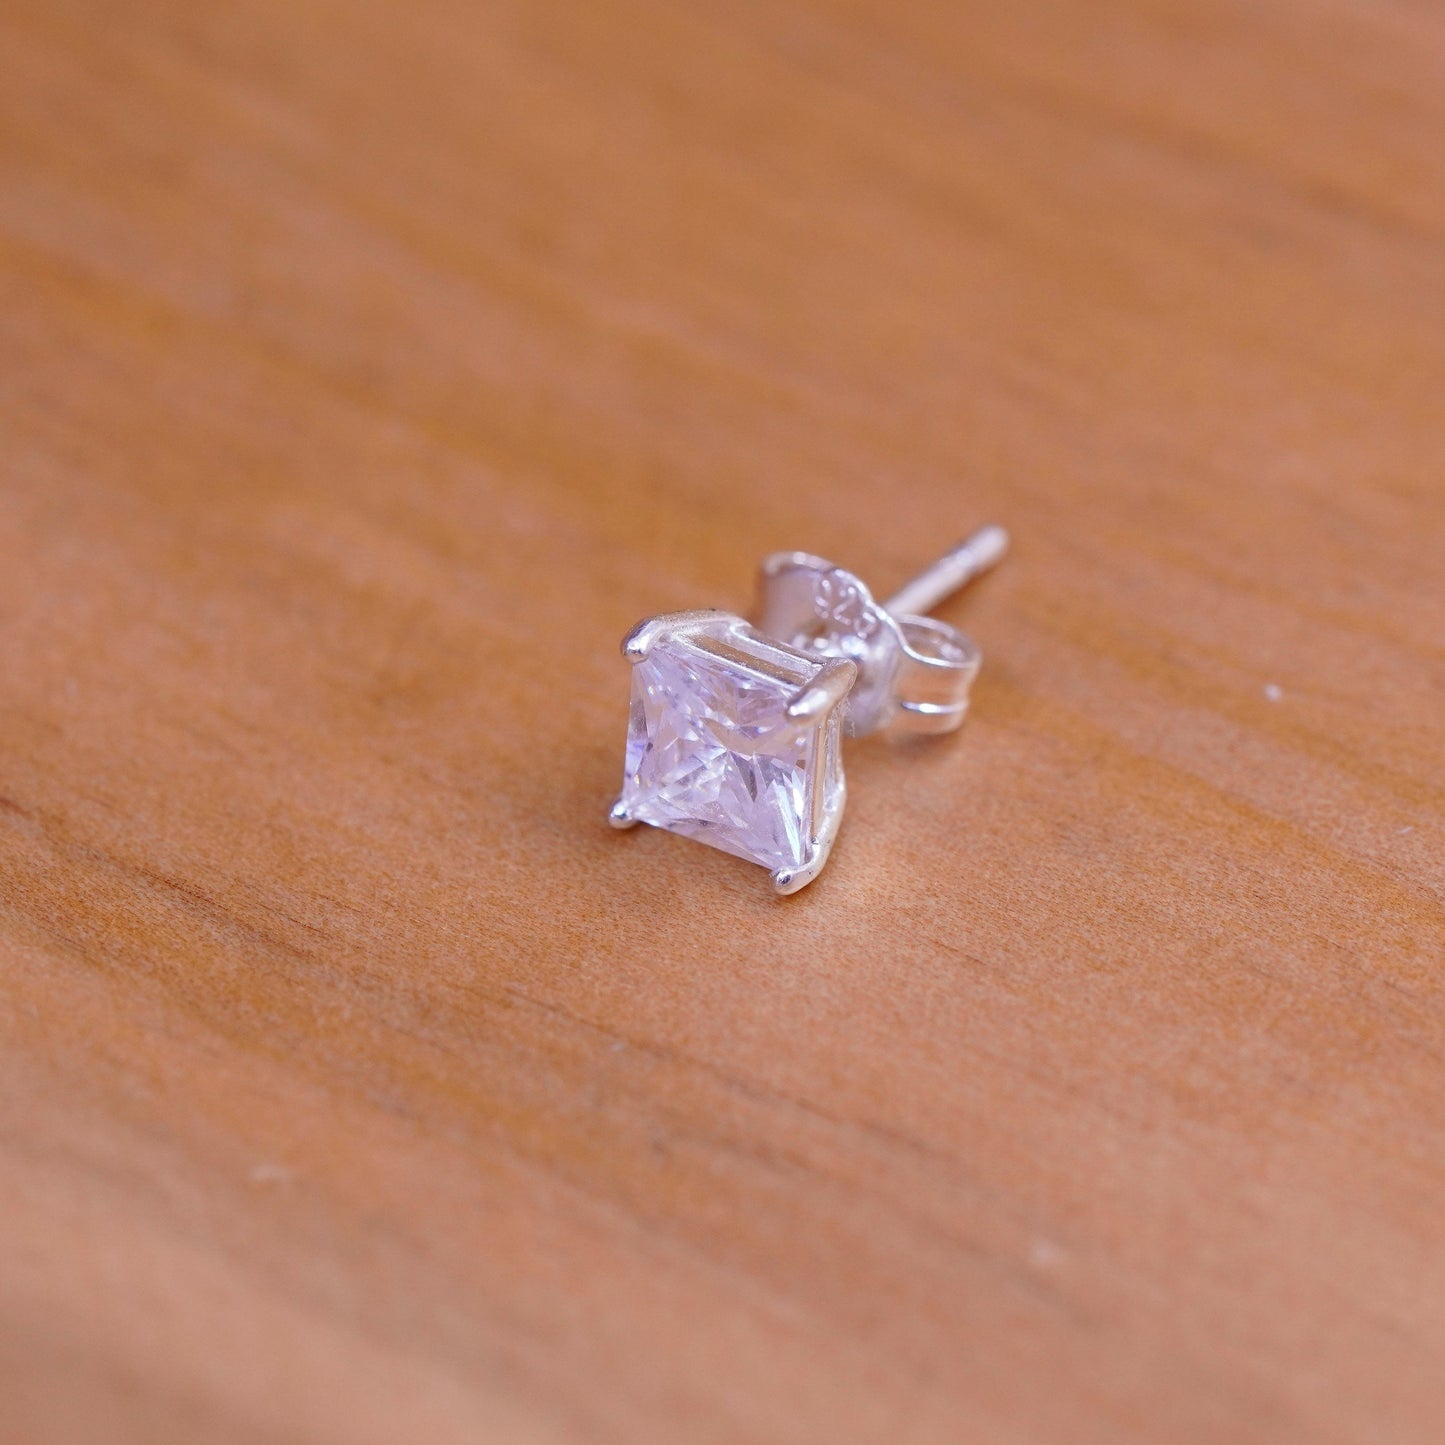 5mm, vintage Sterling 925 silver studs, square cz earrings